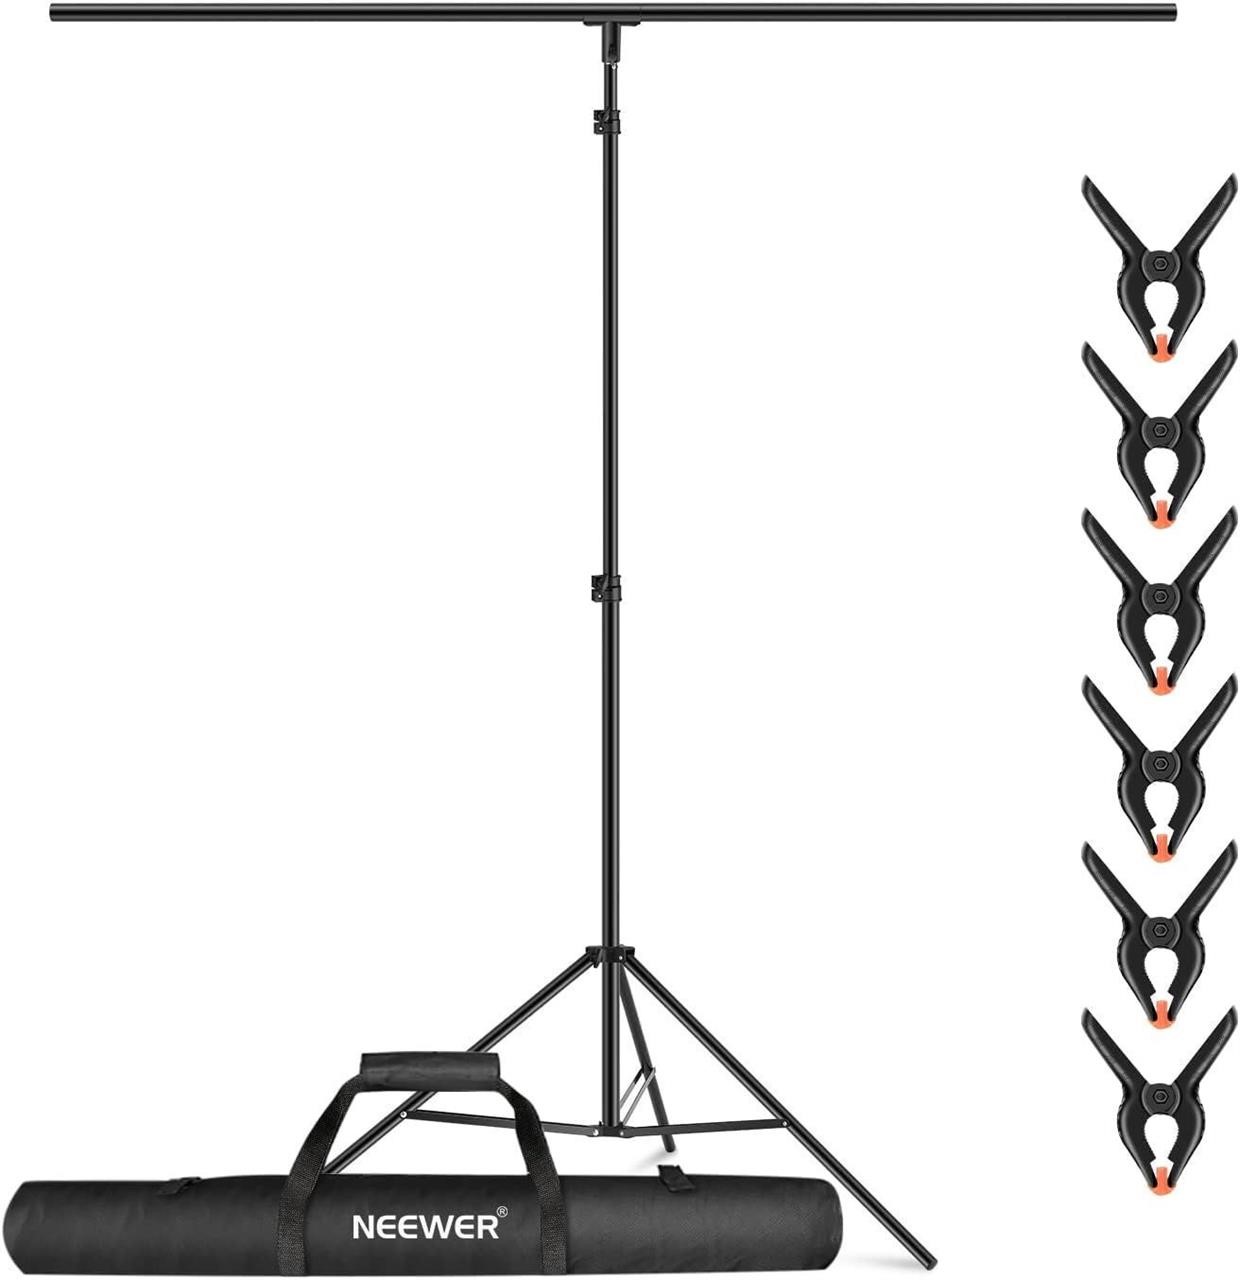 NEEWER T-Shaped Backdrop Support Stand Kit,